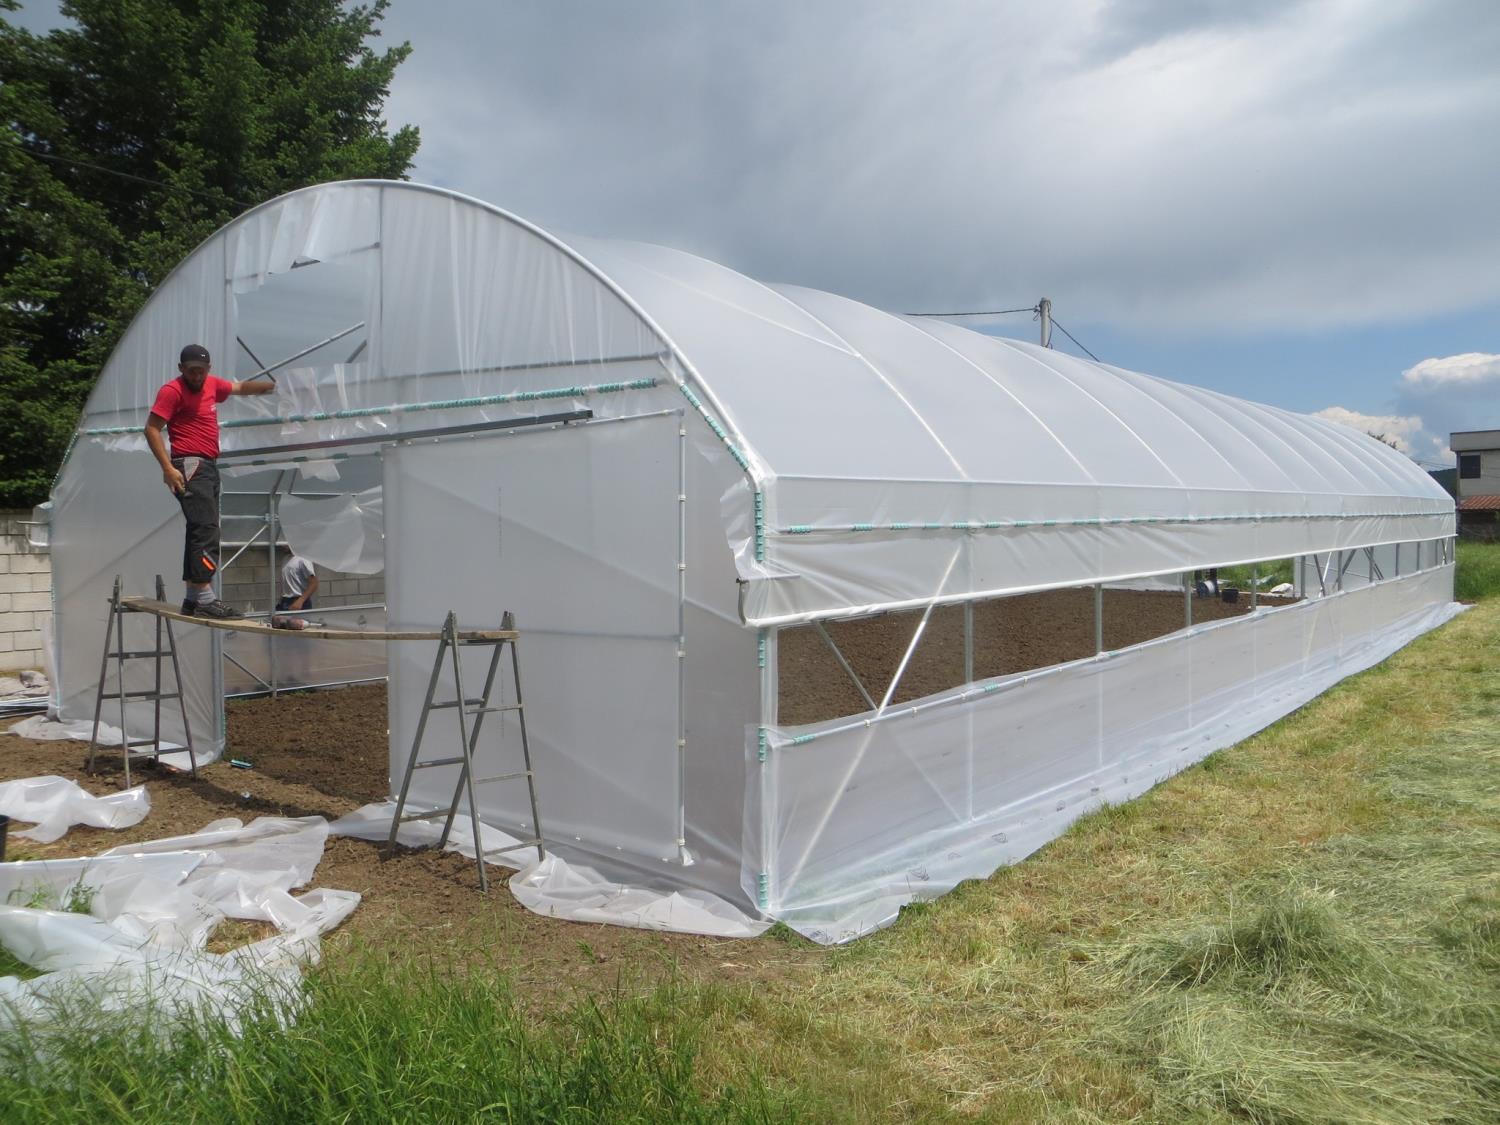 20 farmers with greenhouses for growing vegetables are supported!